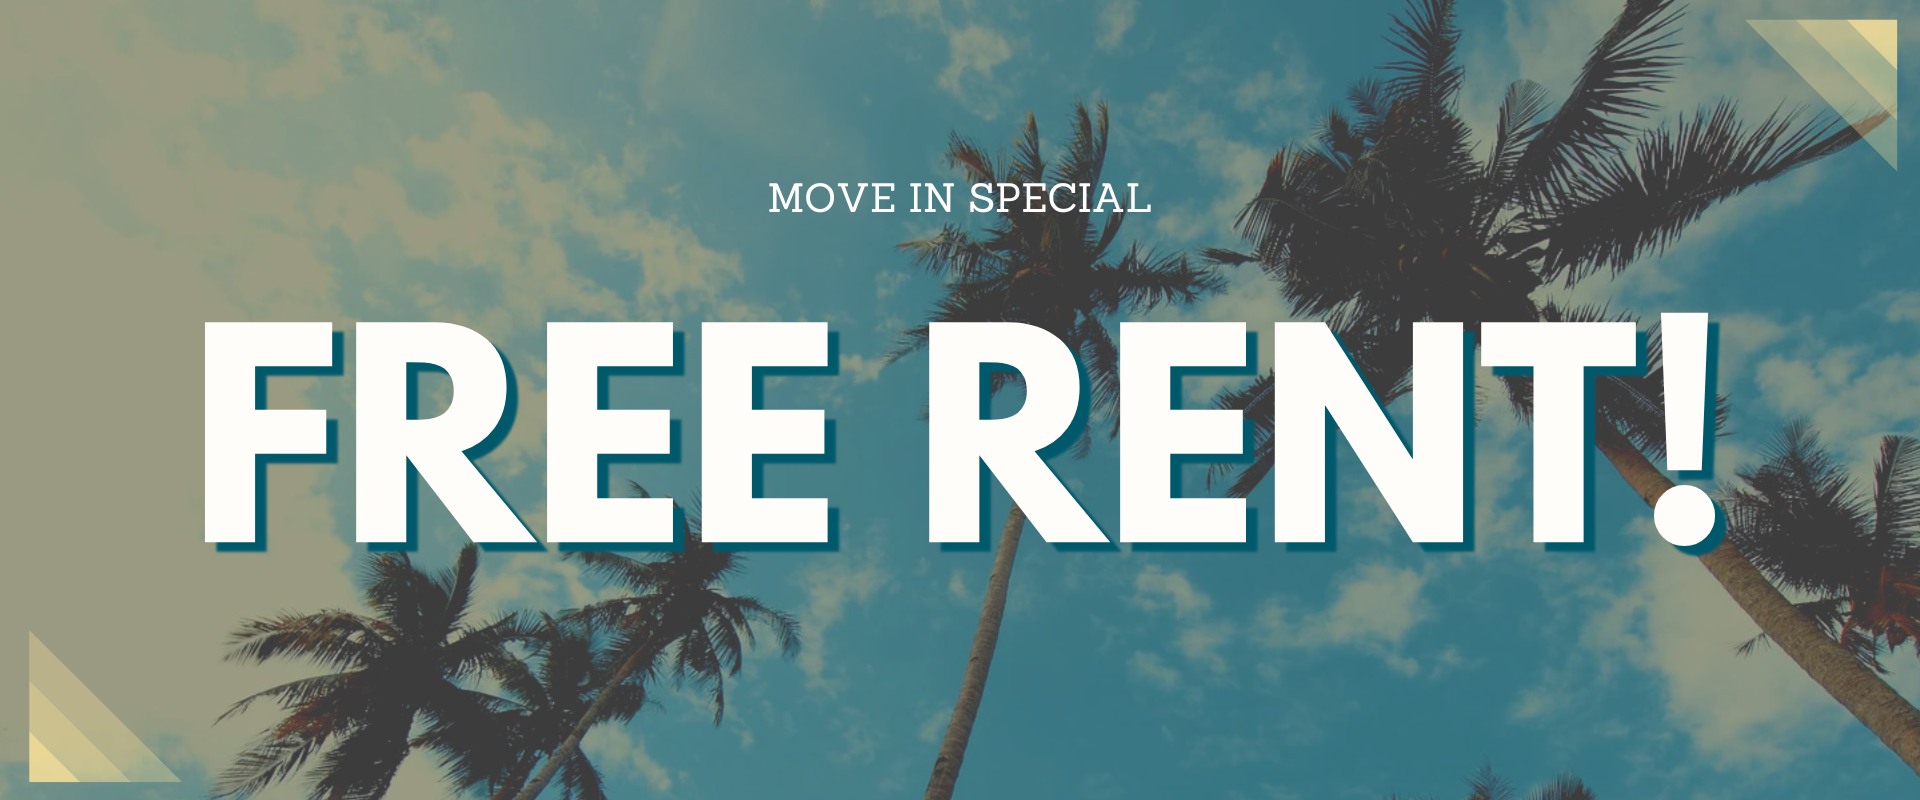 Move In Special FREE RENT!